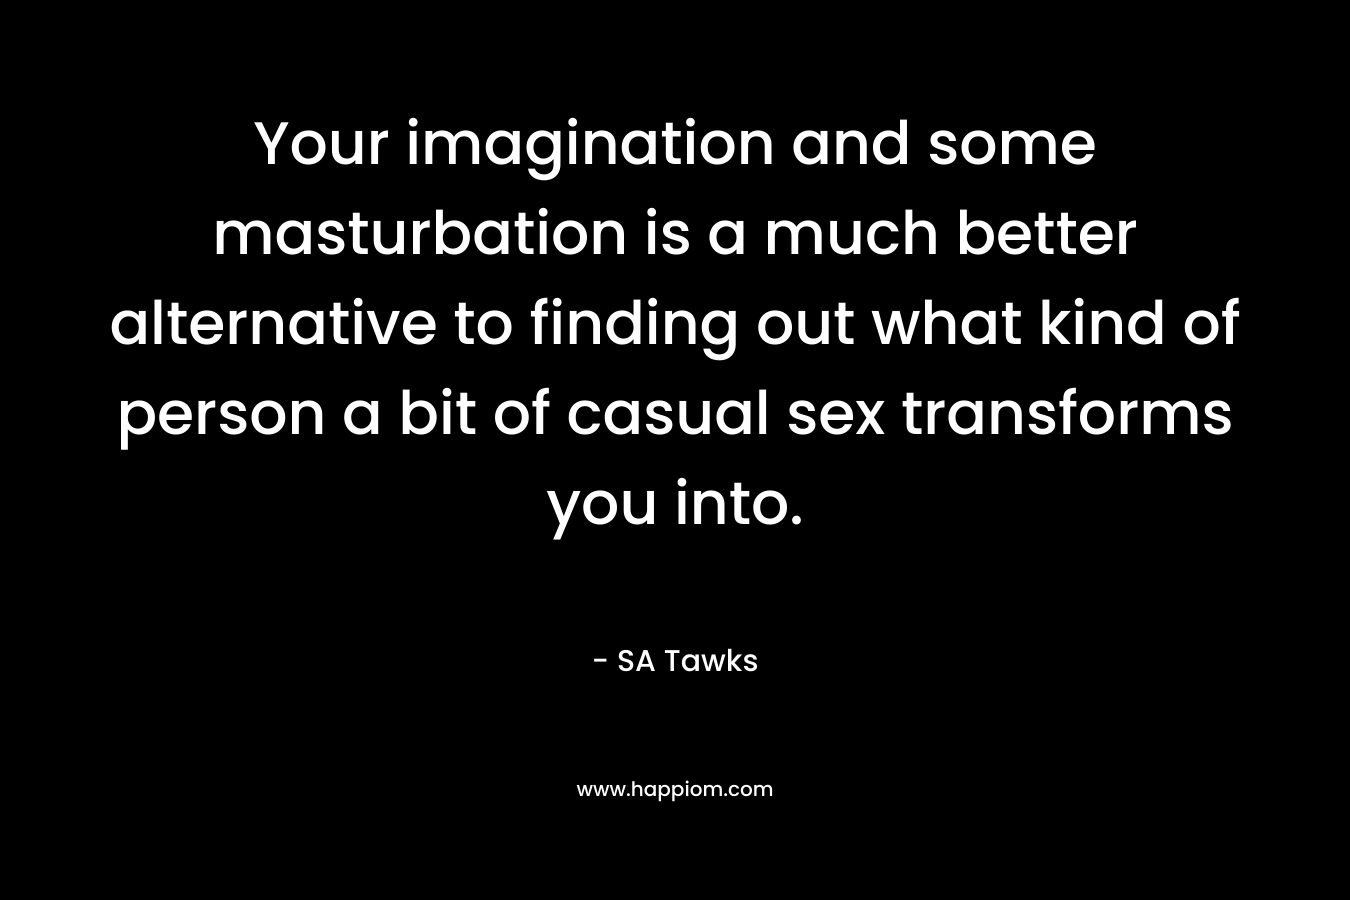 Your imagination and some masturbation is a much better alternative to finding out what kind of person a bit of casual sex transforms you into.